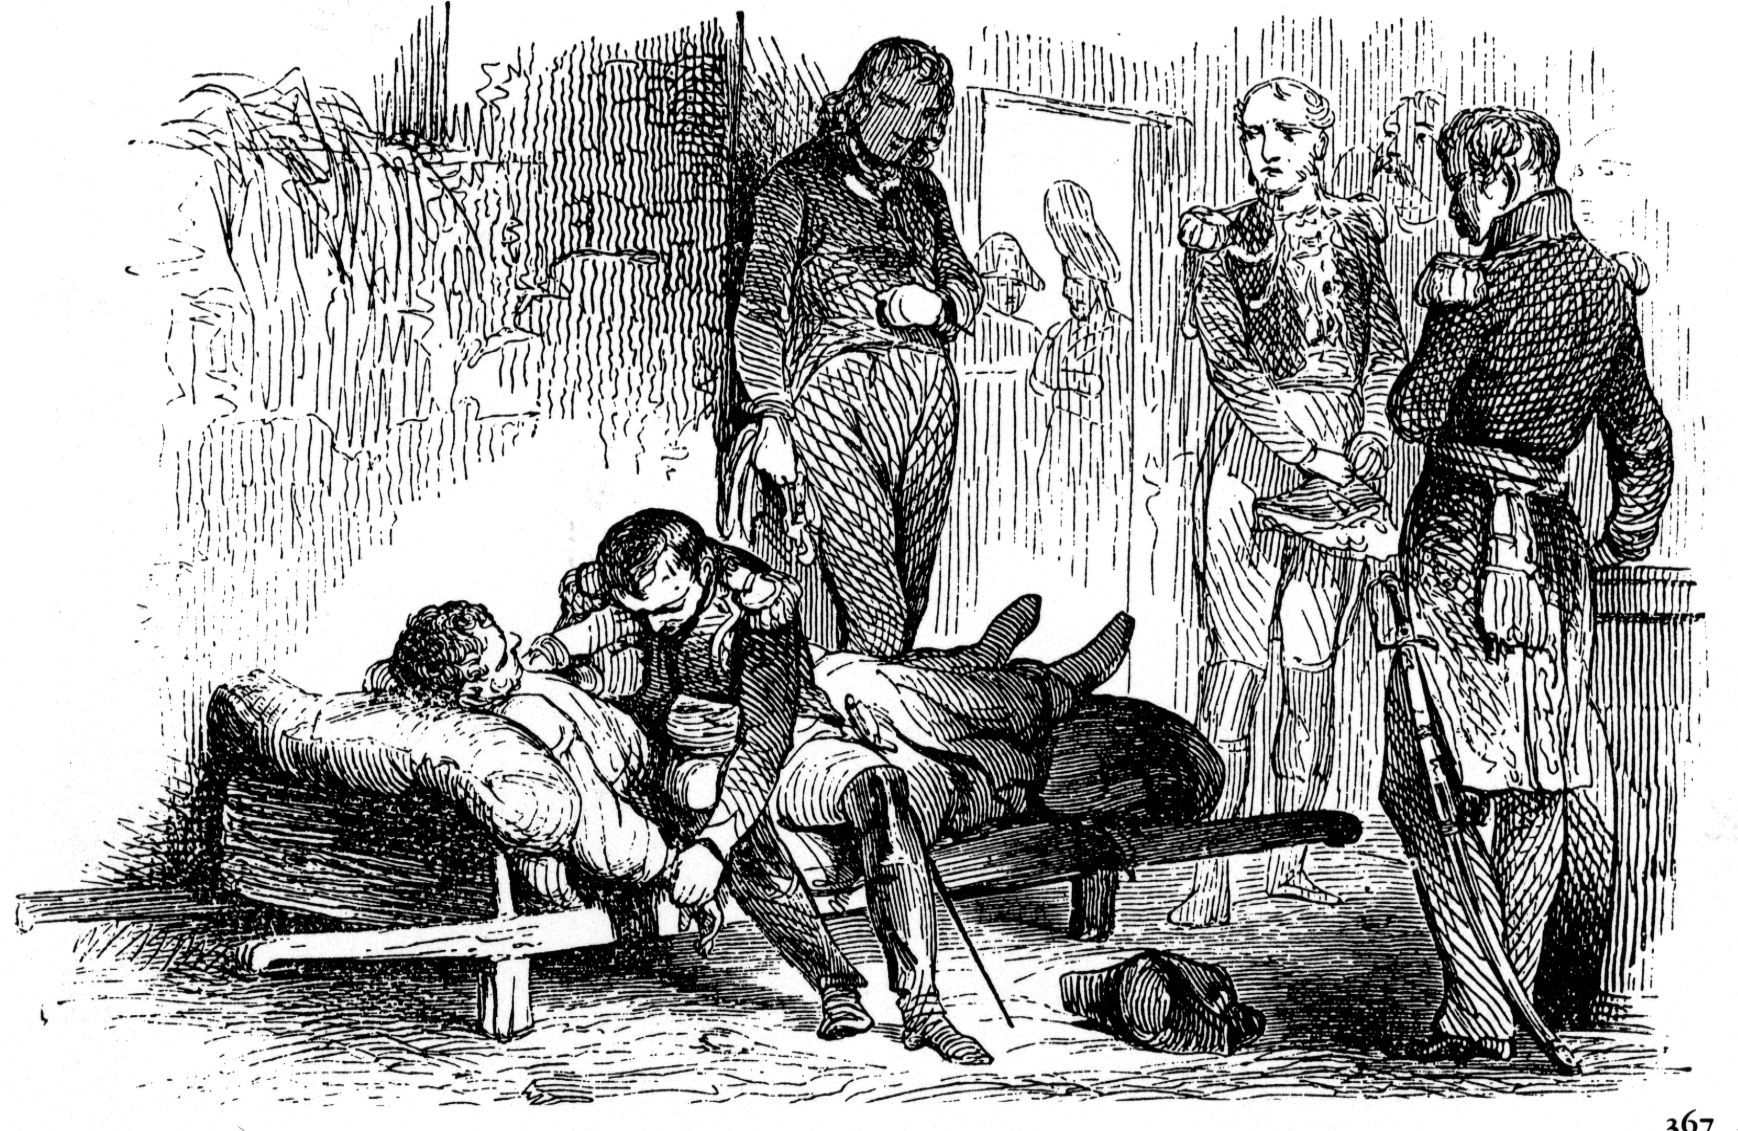 A crestfallen Napoleon tries to comfort Marshal Jean-Baptiste Bessieres, his jack-of-all-trades, who was mortally wounded by a stray cannonball during the approach to Lutzen.